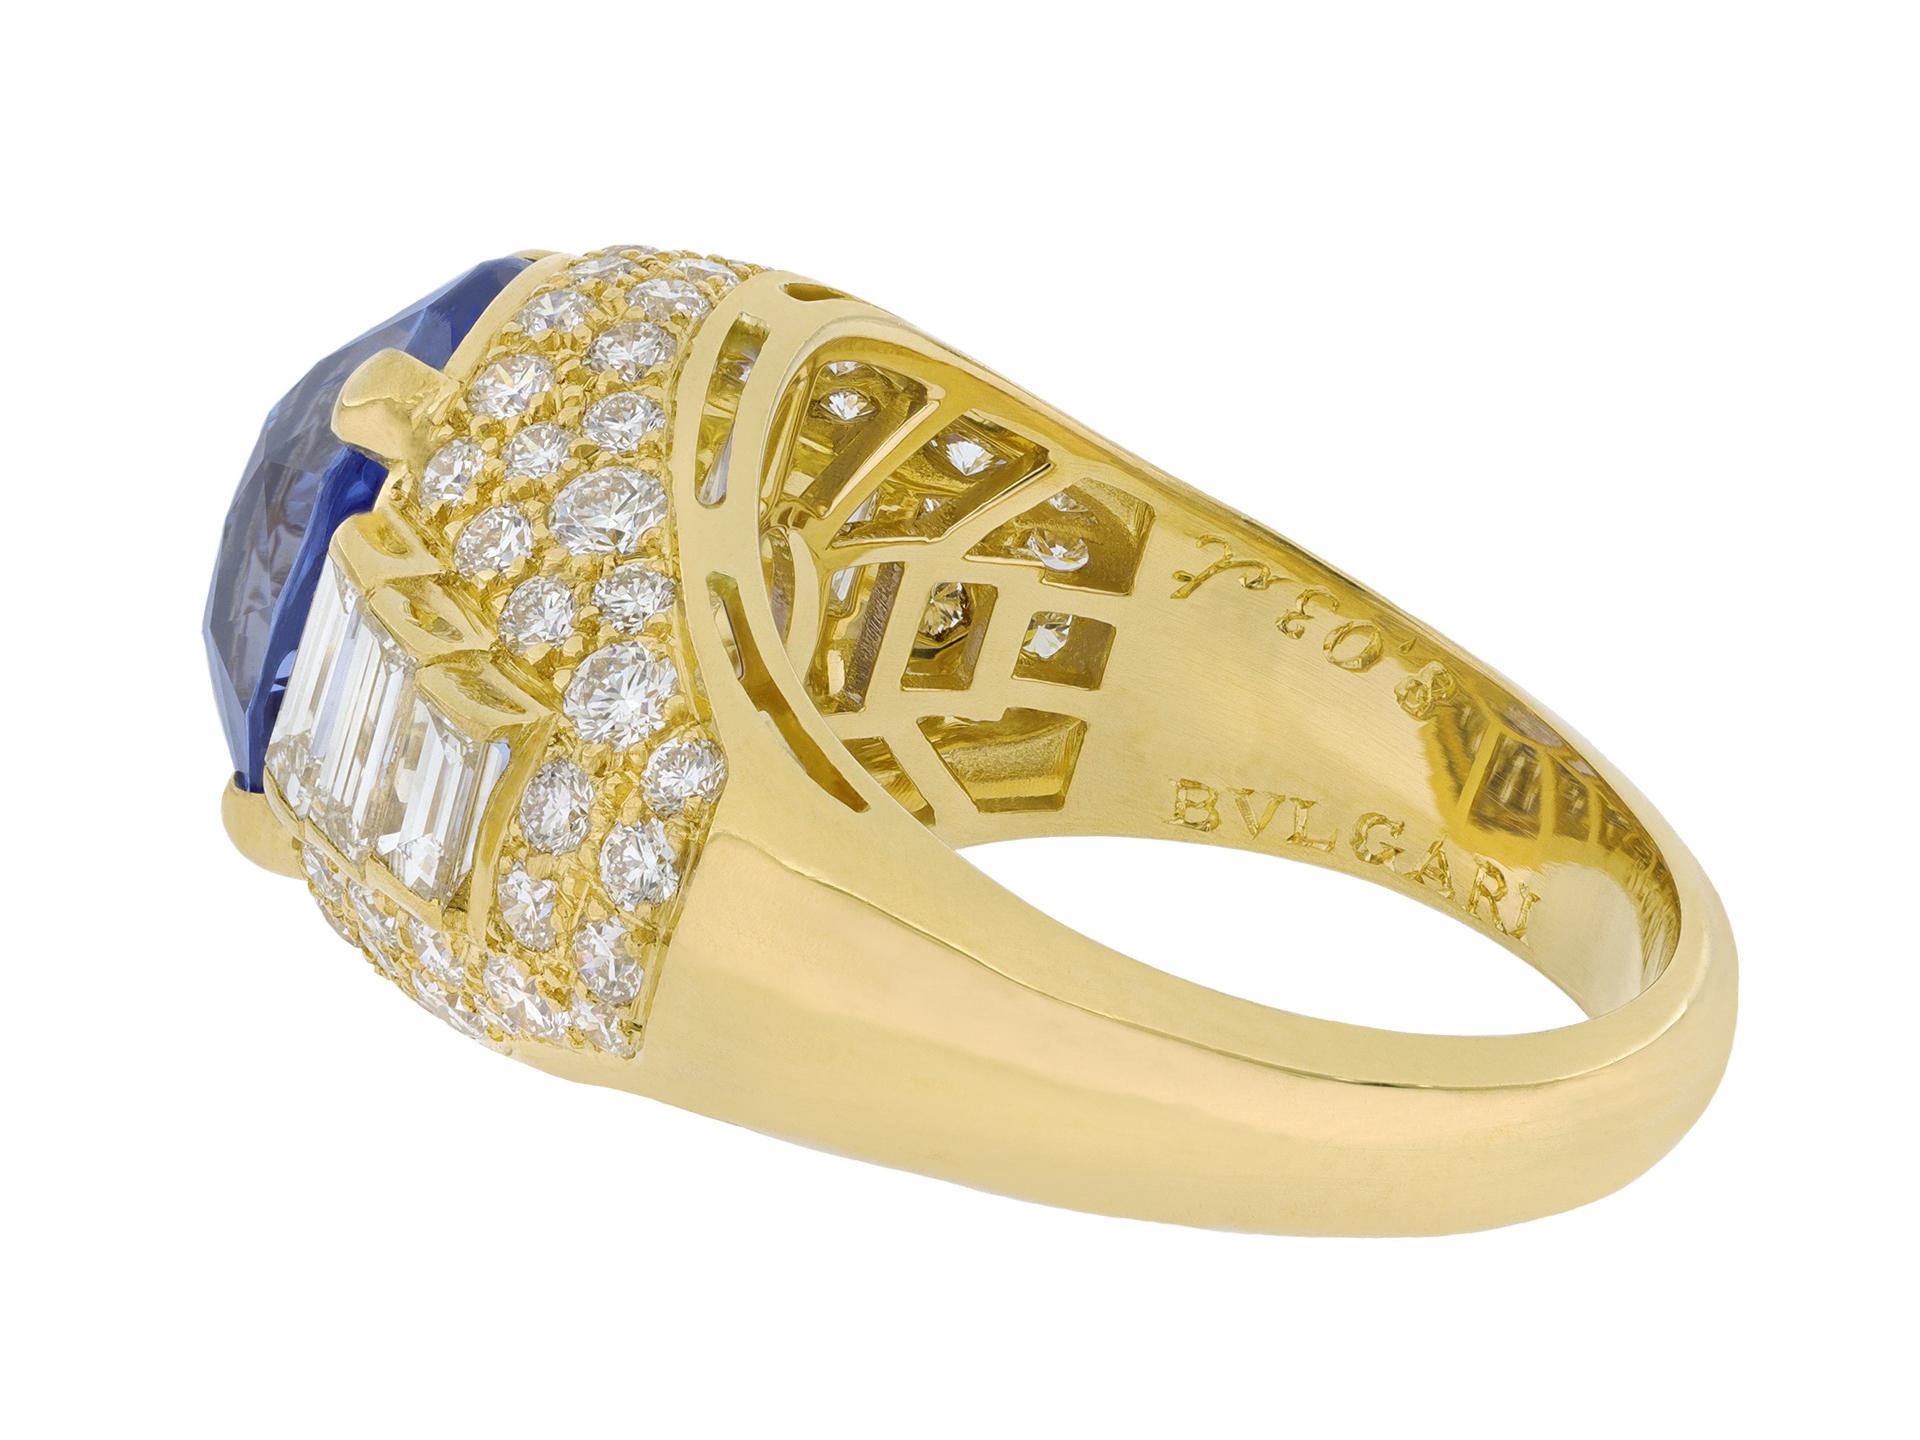 Bulgari Ceylon sapphire and diamond 'Trombino' ring. Set to centre with one oval mixed cut natural unenhanced Ceylon sapphire in an open back claw setting with an approximate weight of 8.03 carats, flanked to either side with six rectangular step